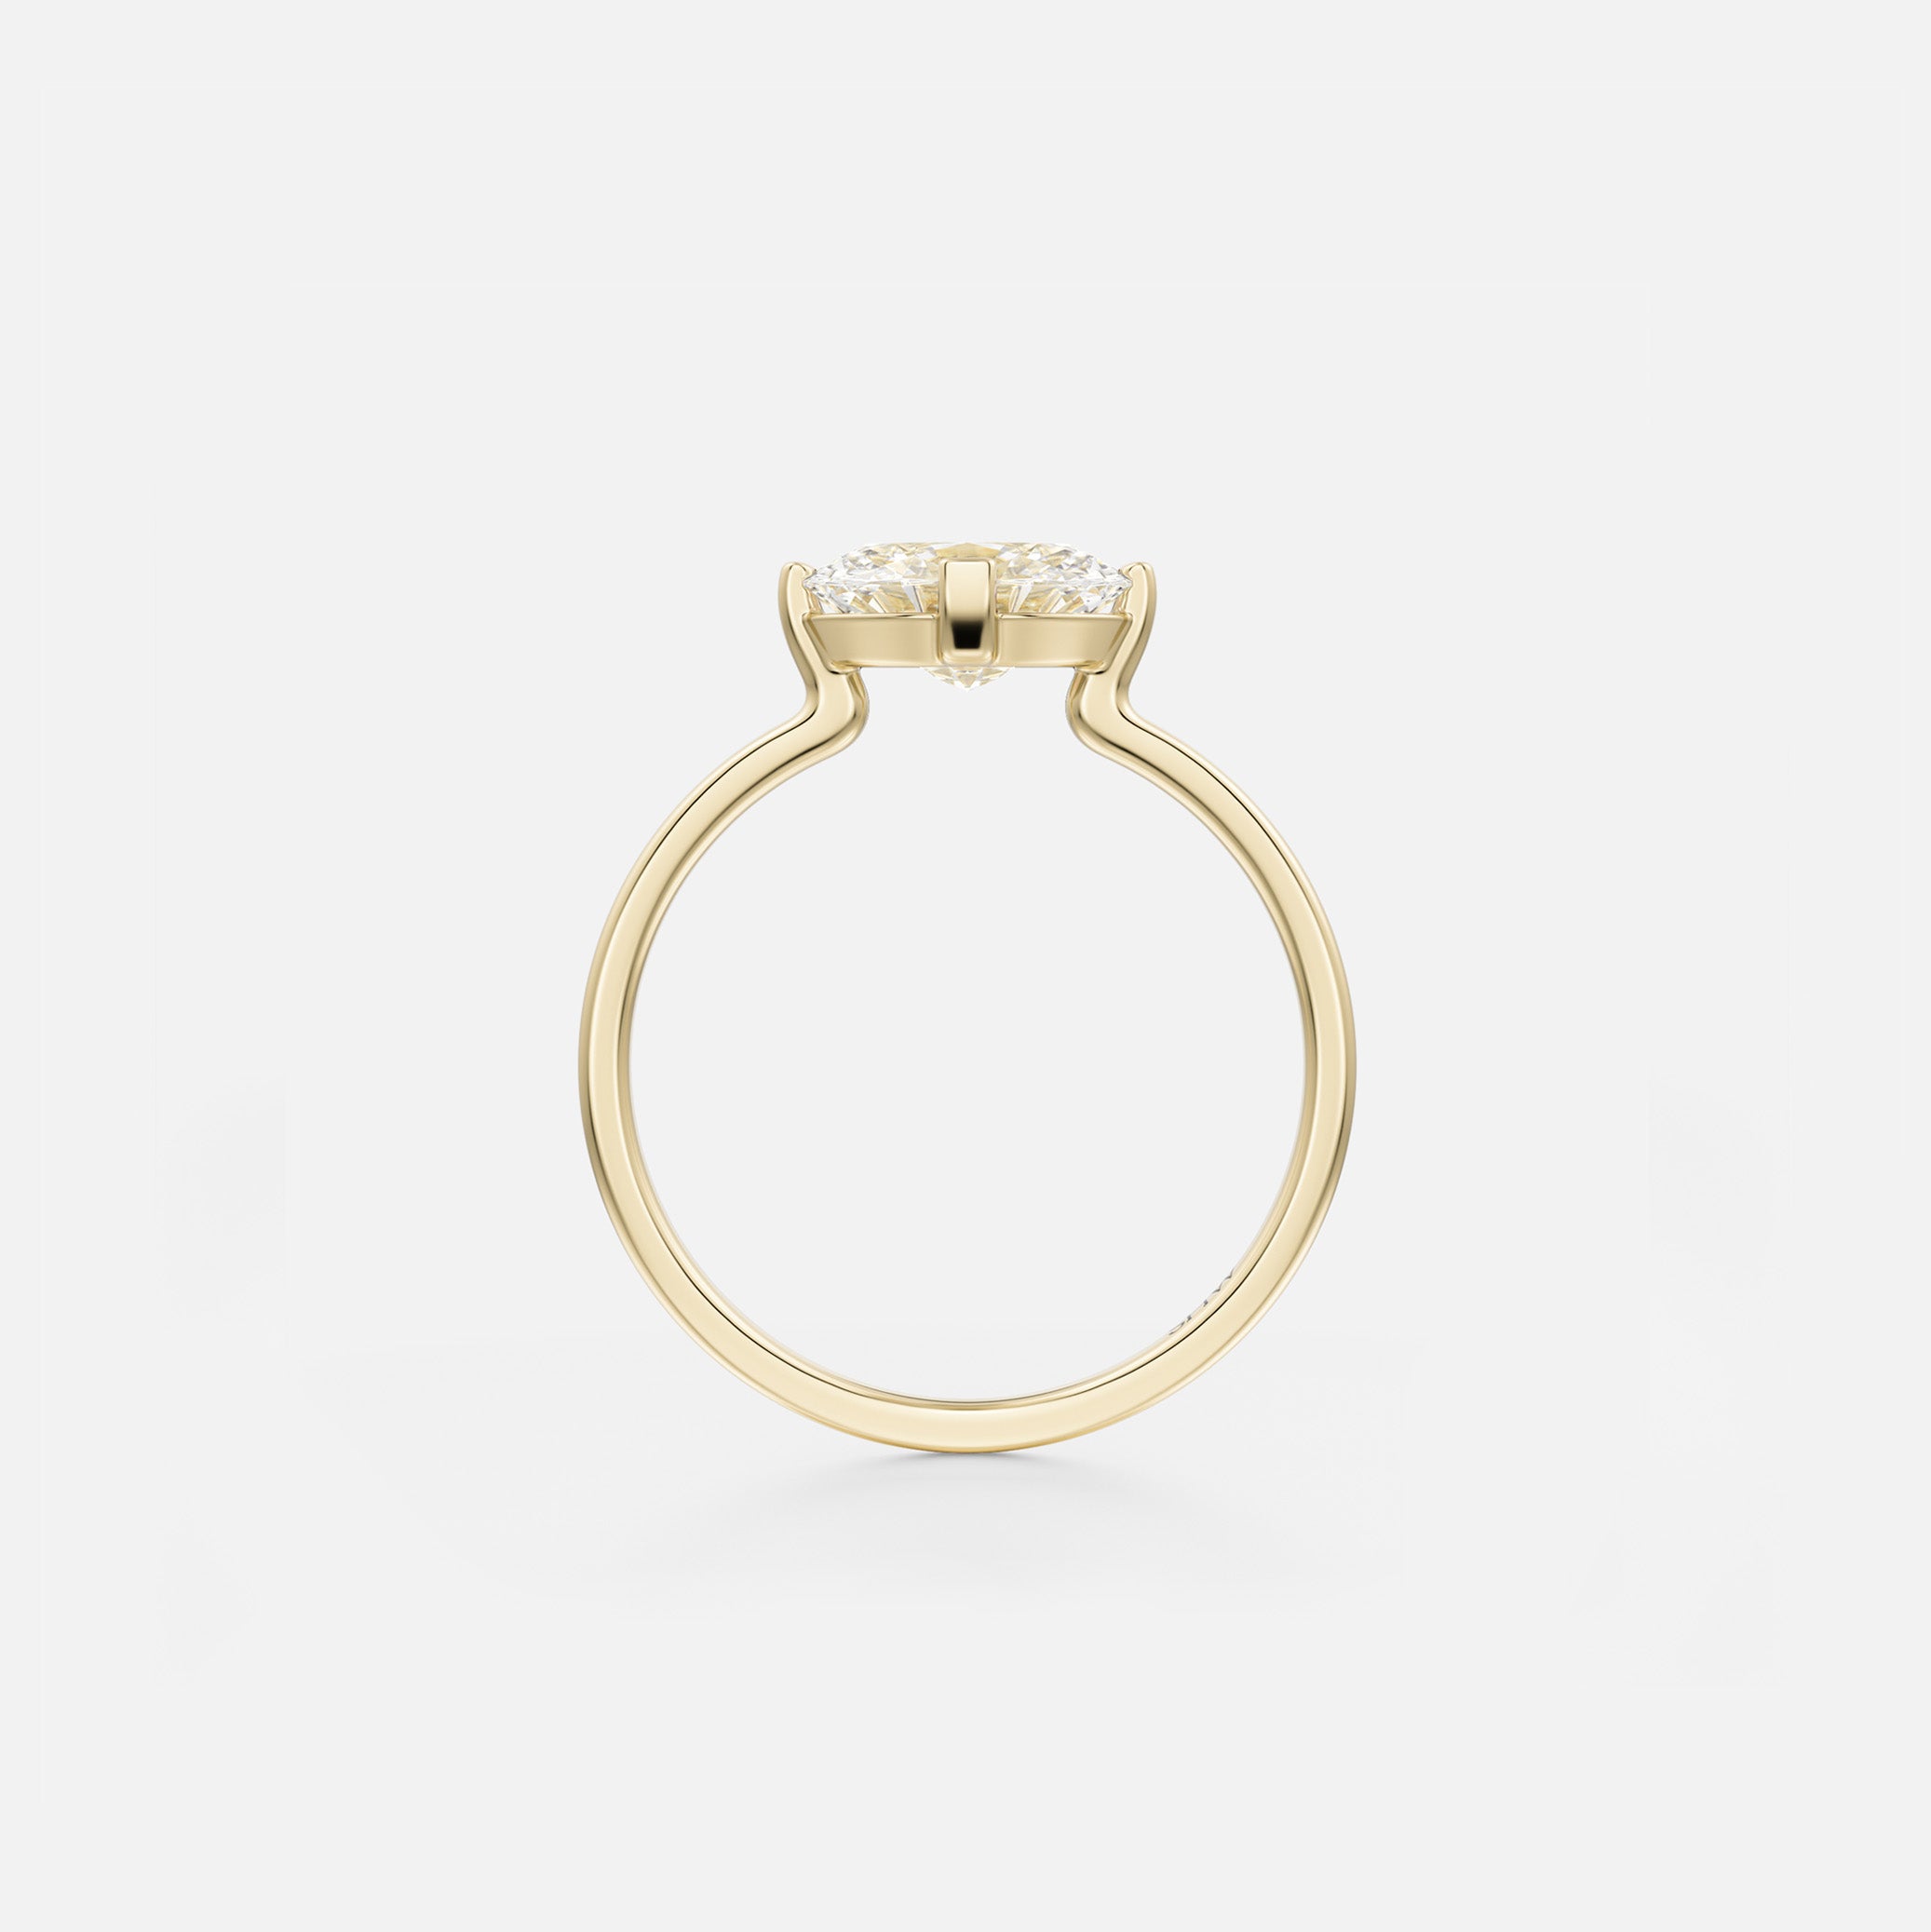 Ema Flat Band with Oval East West Alternative Engagement Ring Setting in 14k yellow, white, or rose Gold or platinum handmade by SHW Fine Jewelry NYC